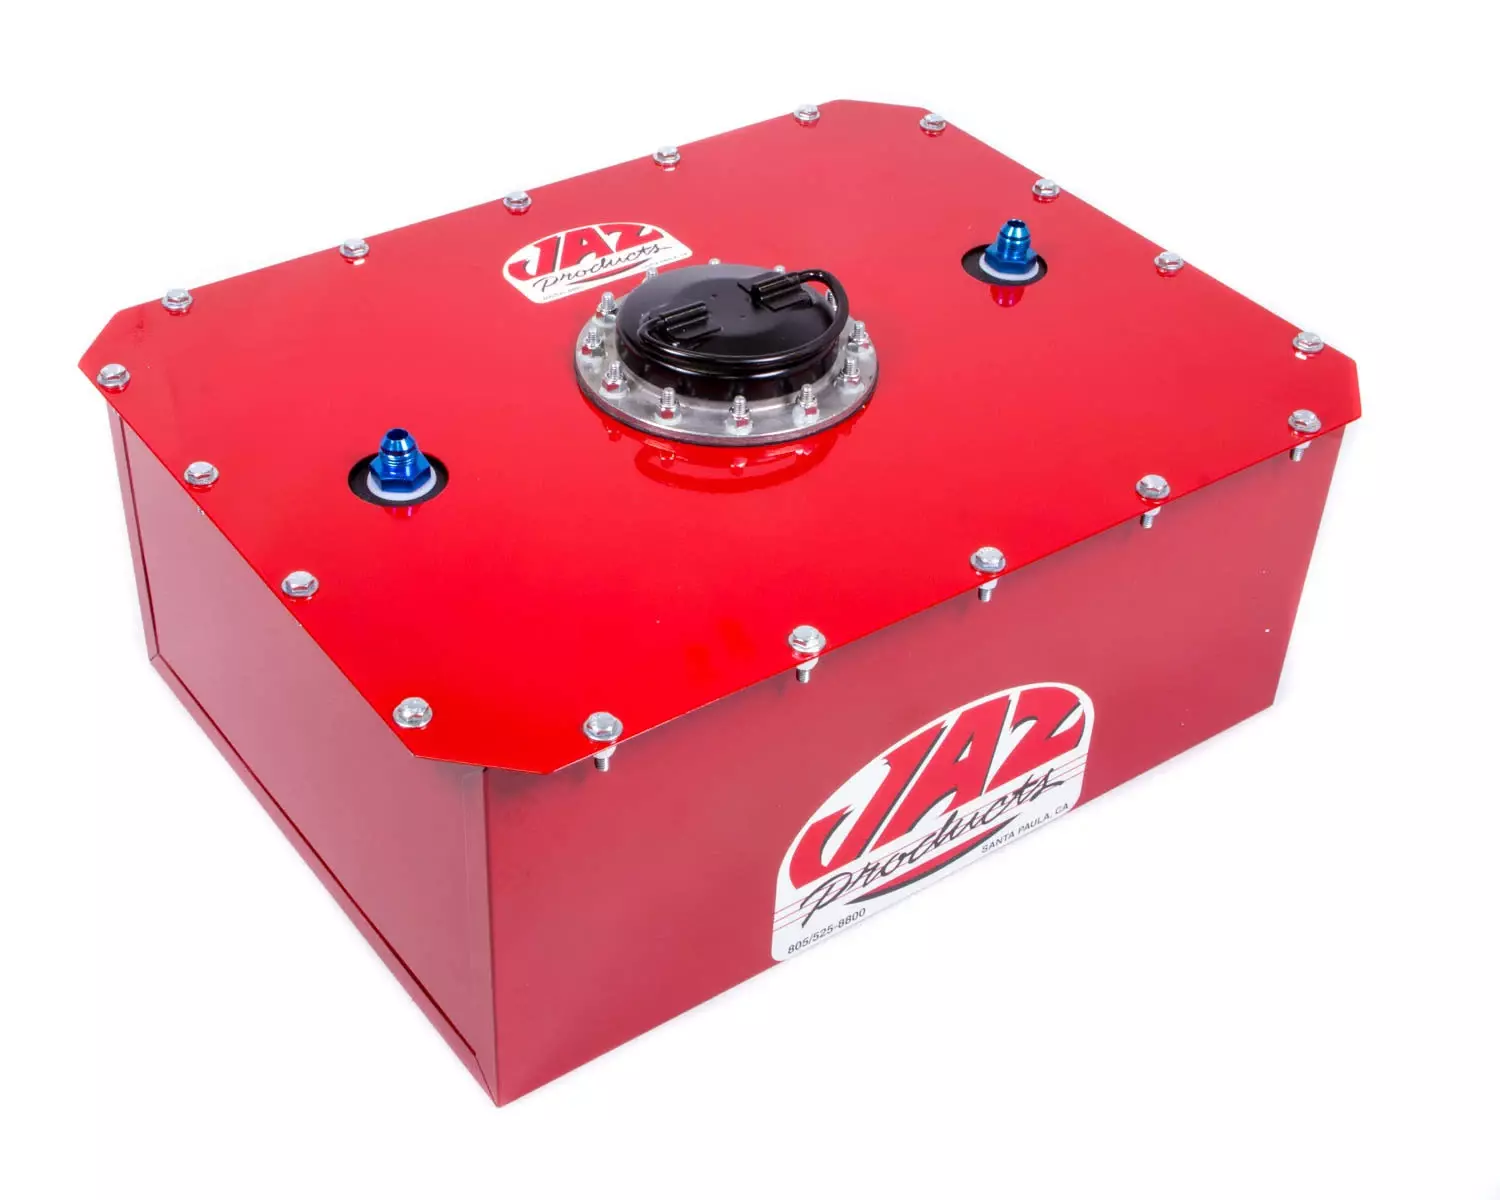 JAZ Products 275-008-06 Fuel Cell and Can, Pro Sport, 8 gal, 20-5/8 in Wide x 15-1/2 in Deep x 8-3/8 in Tall, 8 AN Outlet / Vent, Foam, Steel, Red Powder Coat, Each